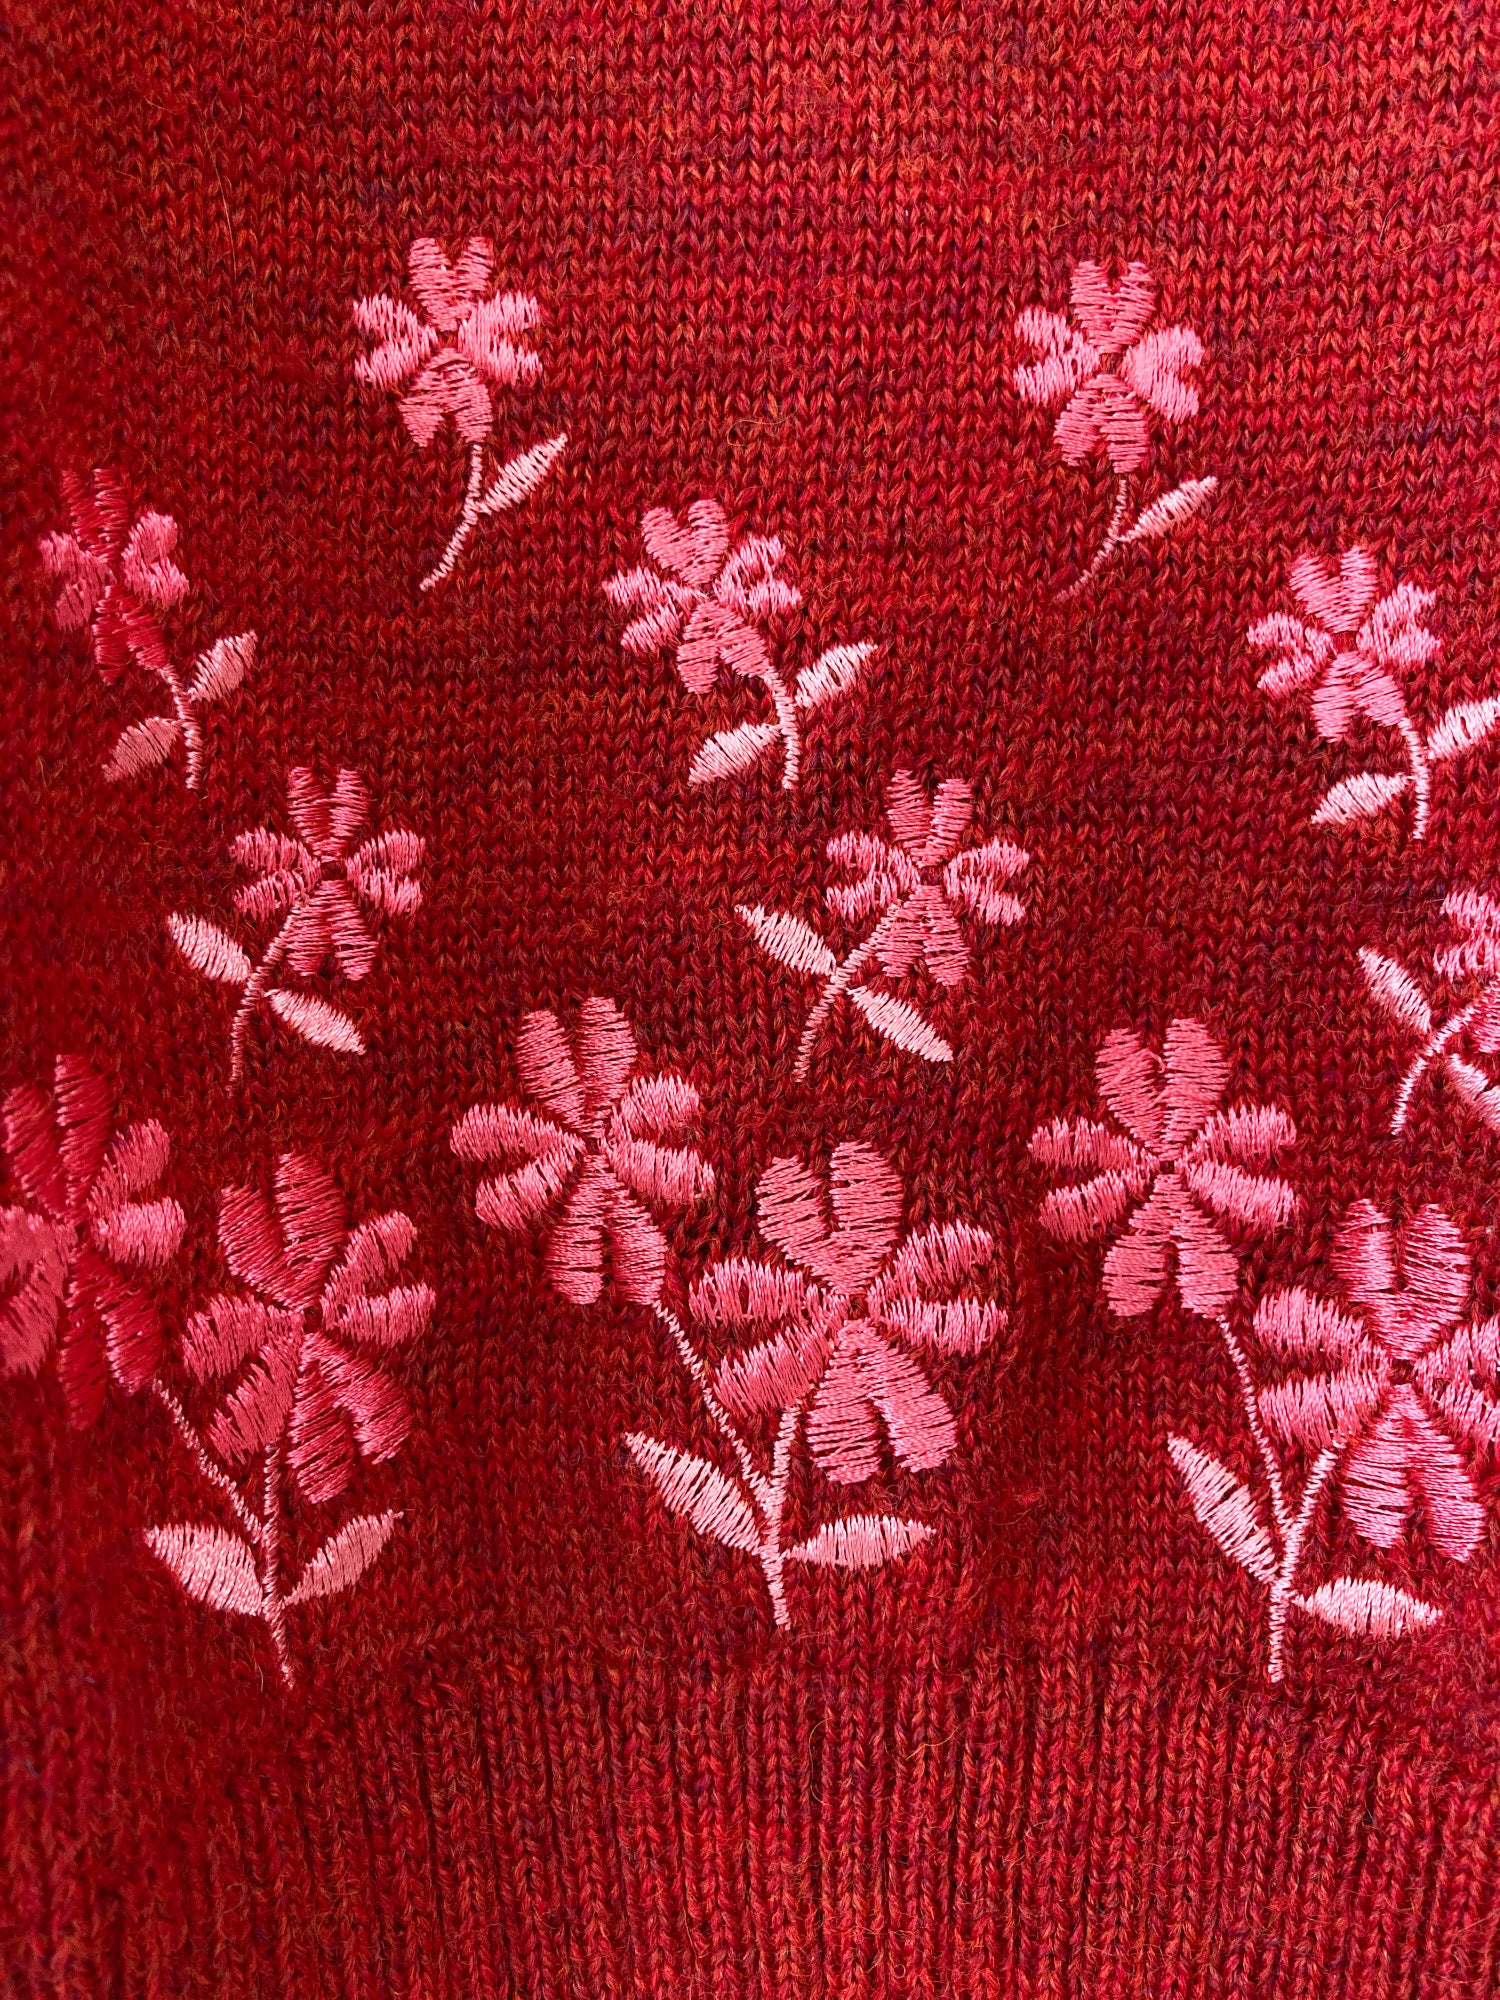 Tricot Comme des Garcons 1997 burgundy wool knit vest with floral embroidery